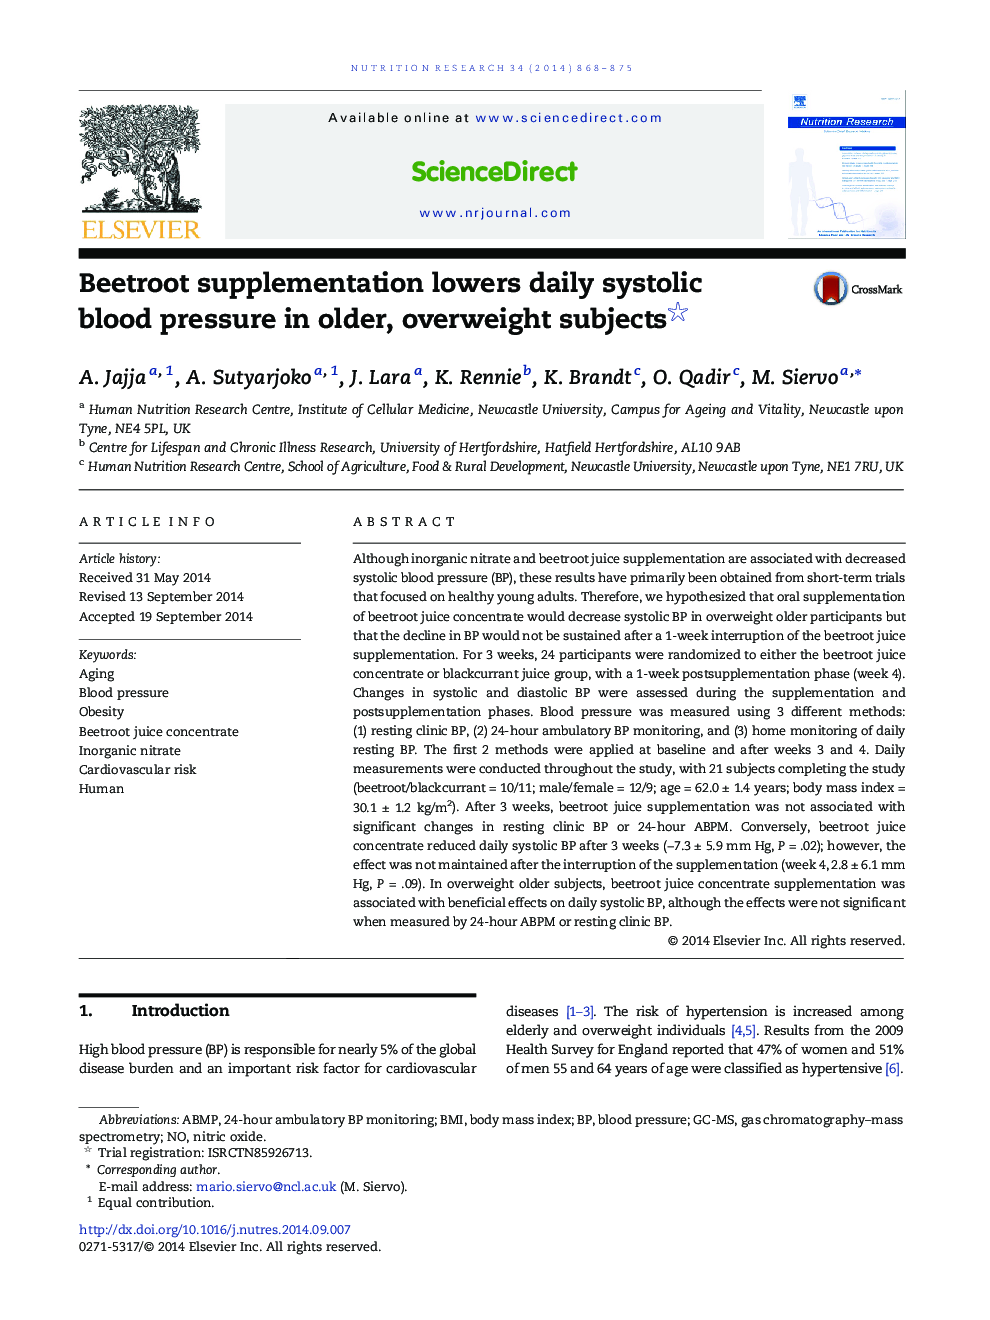 Beetroot supplementation lowers daily systolic blood pressure in older, overweight subjects